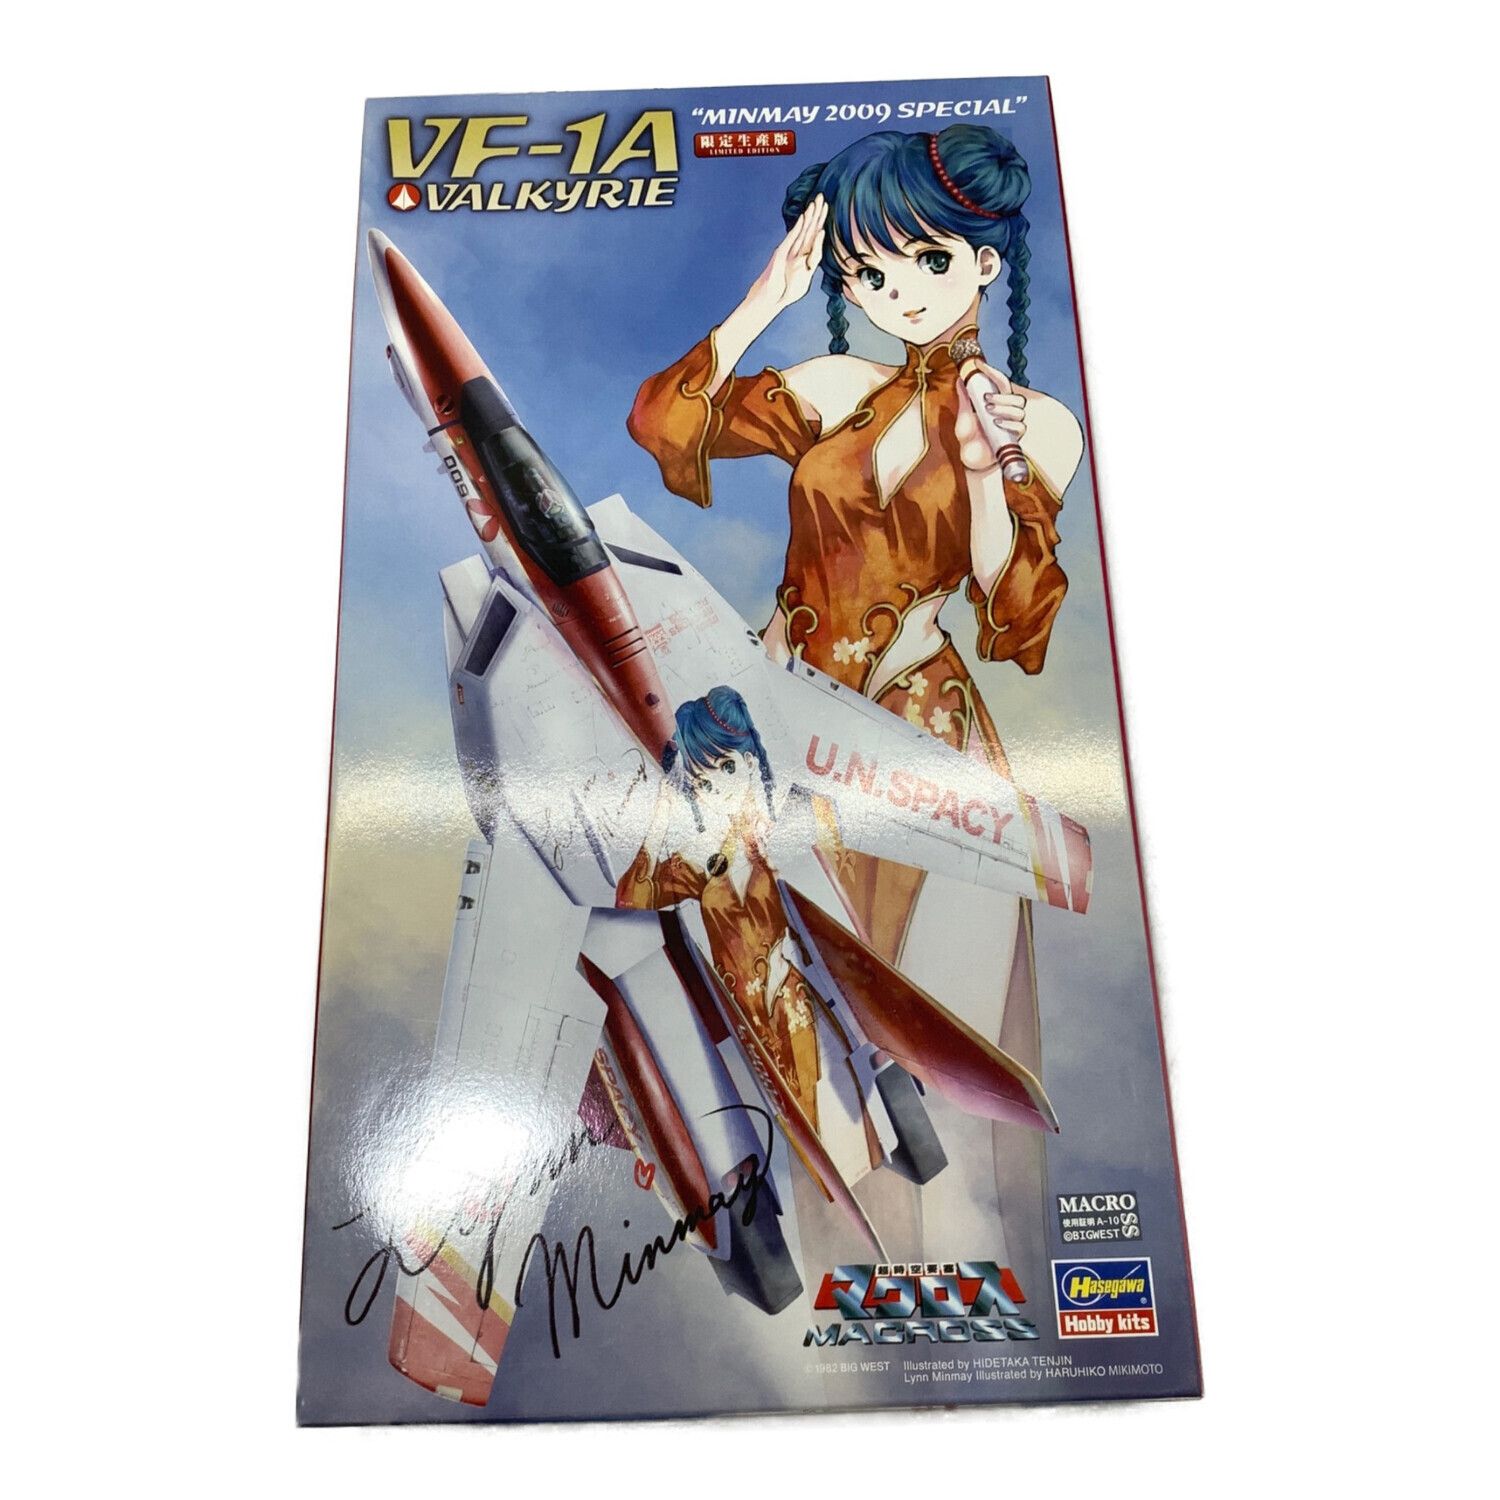 Hasegawa Vf1 Valkyrie Minmay 2009 Special 1/72 Model Kit for sale online 